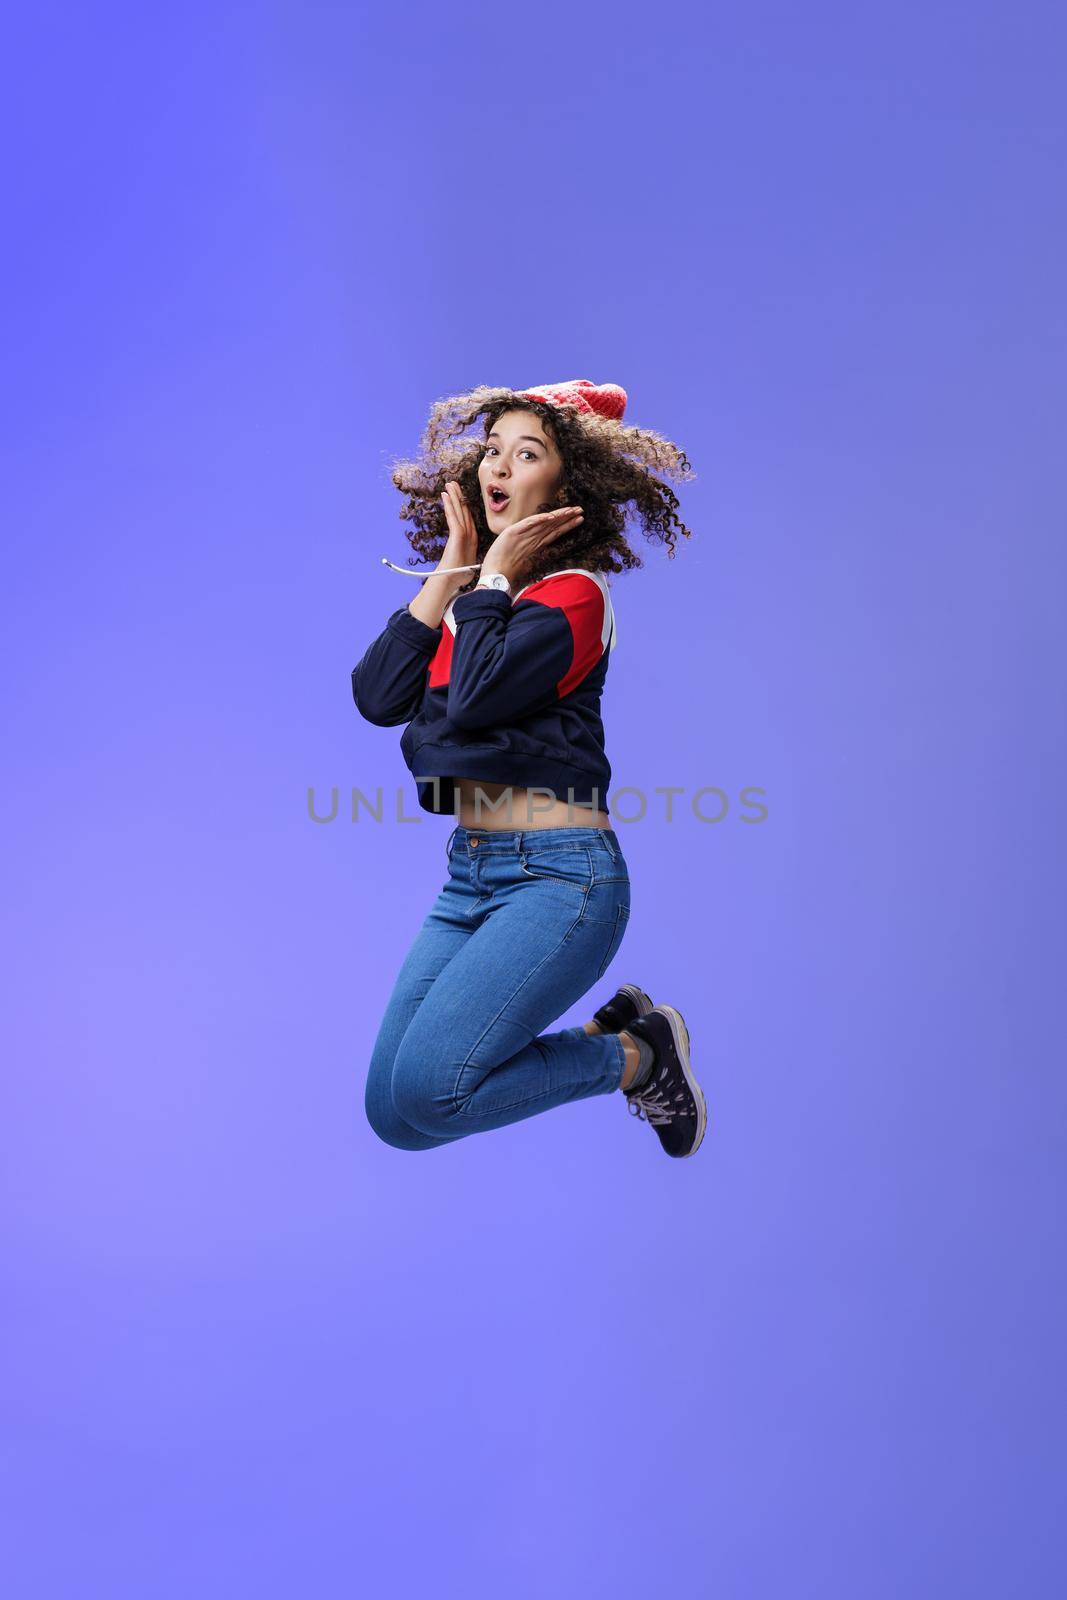 Surprised and amazed amused good-looking woman with curly hair in winter beanie and sweatshirt open mouth from joy and amazement jumping over blue background having fun feeling playful.